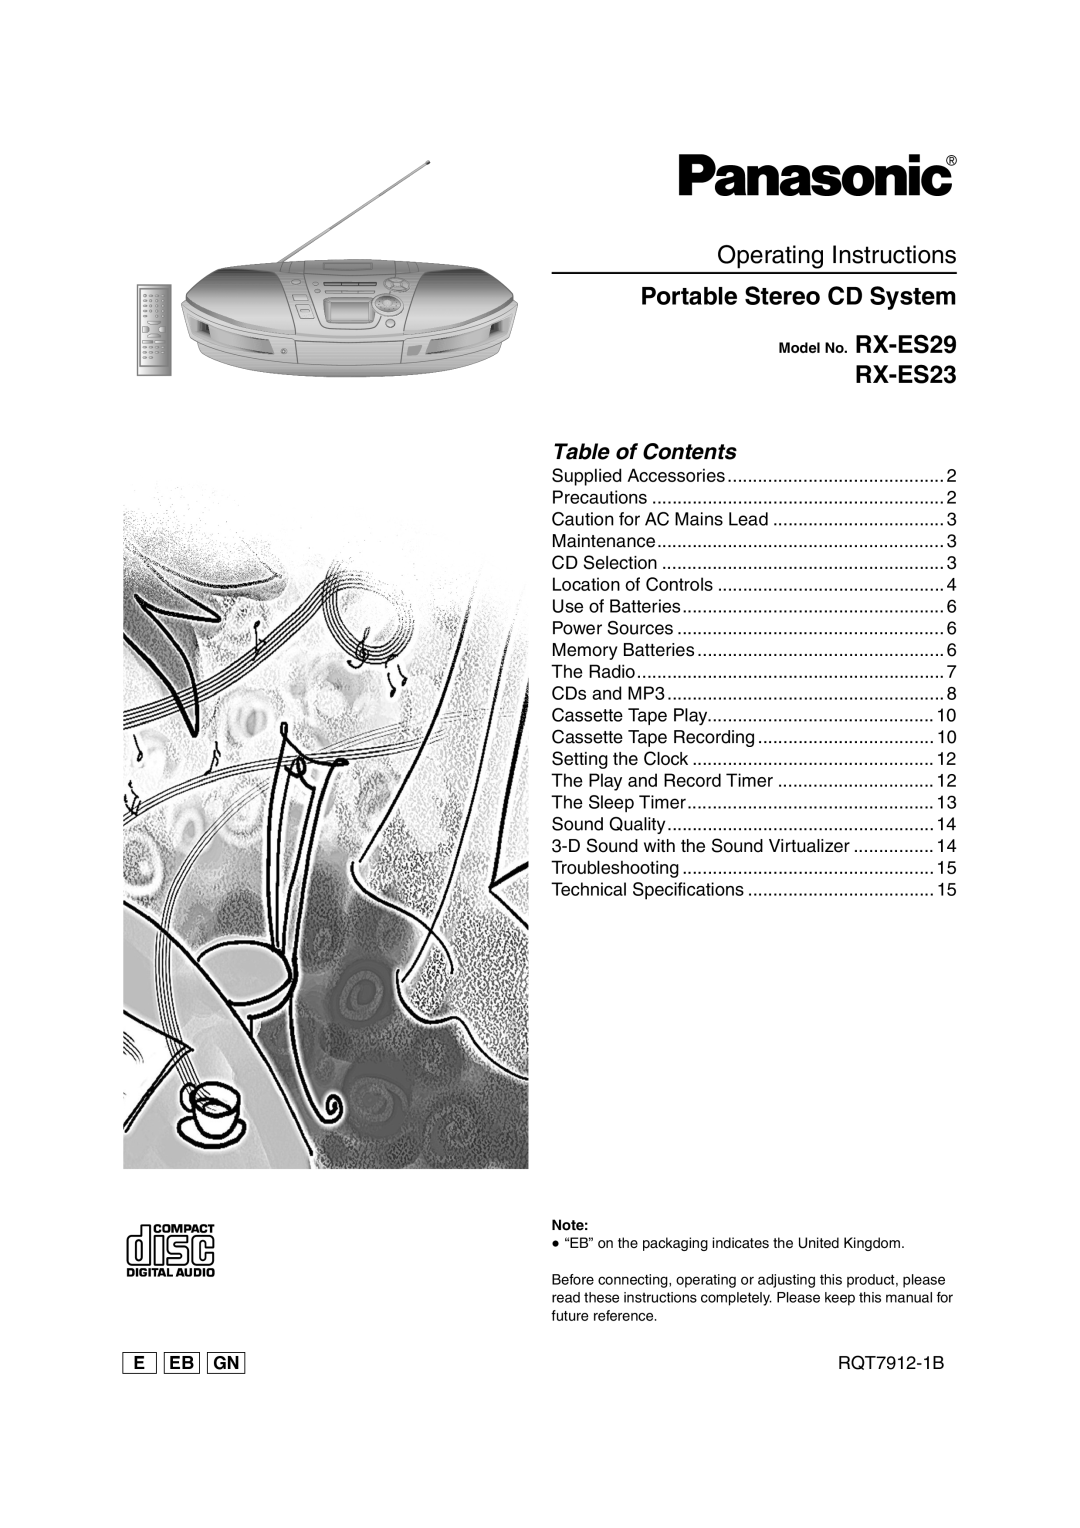 Panasonic RX-ES23 operating instructions Table of Contents, E Eb Gn, Operating Instructions, Portable Stereo CD System 